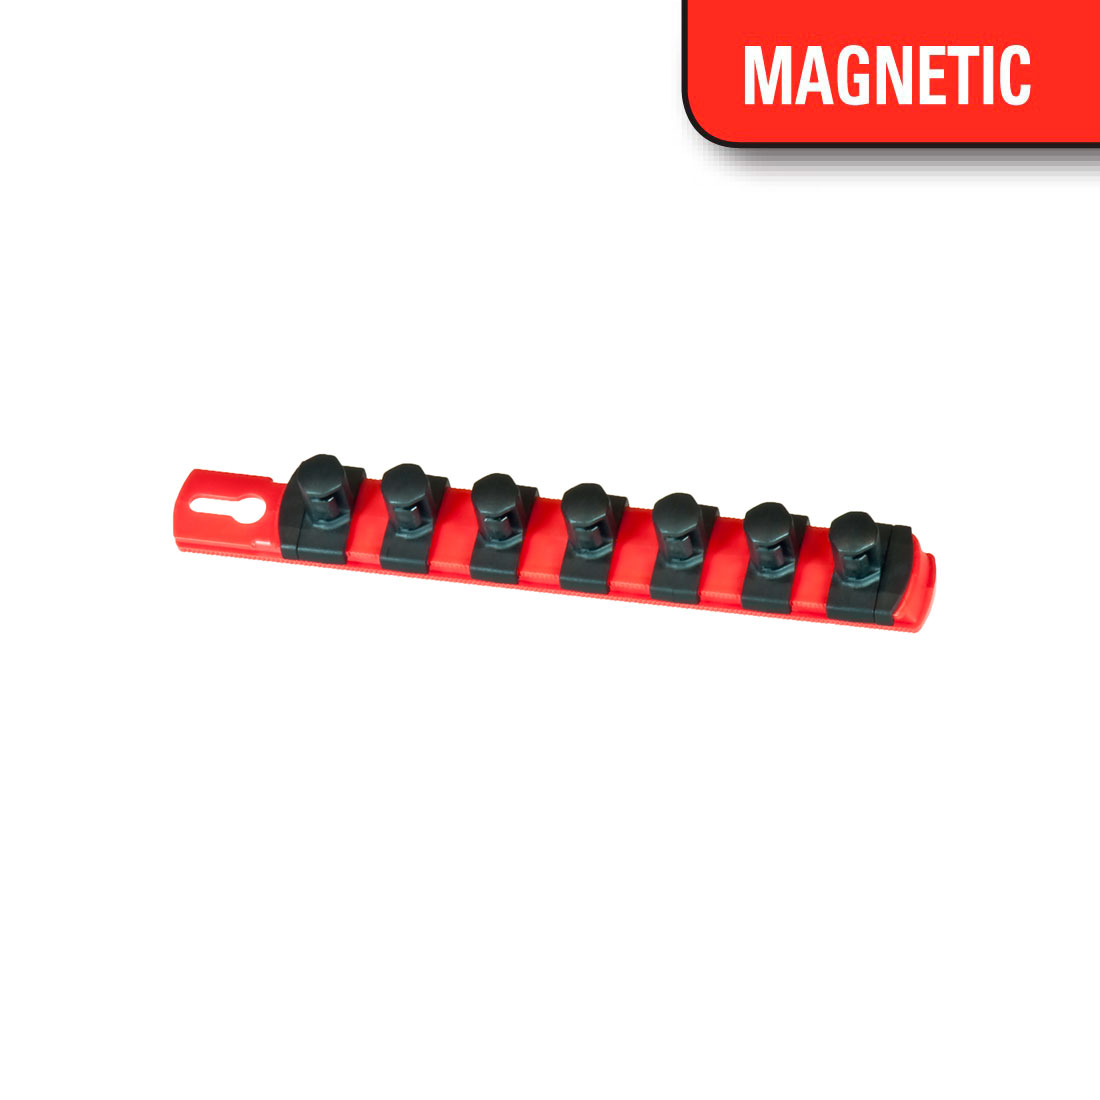 Ernst Manufacturing 8-Inch Magnetic Socket Organizer with 7 1/2-Inch Twist Lock Clips Red 